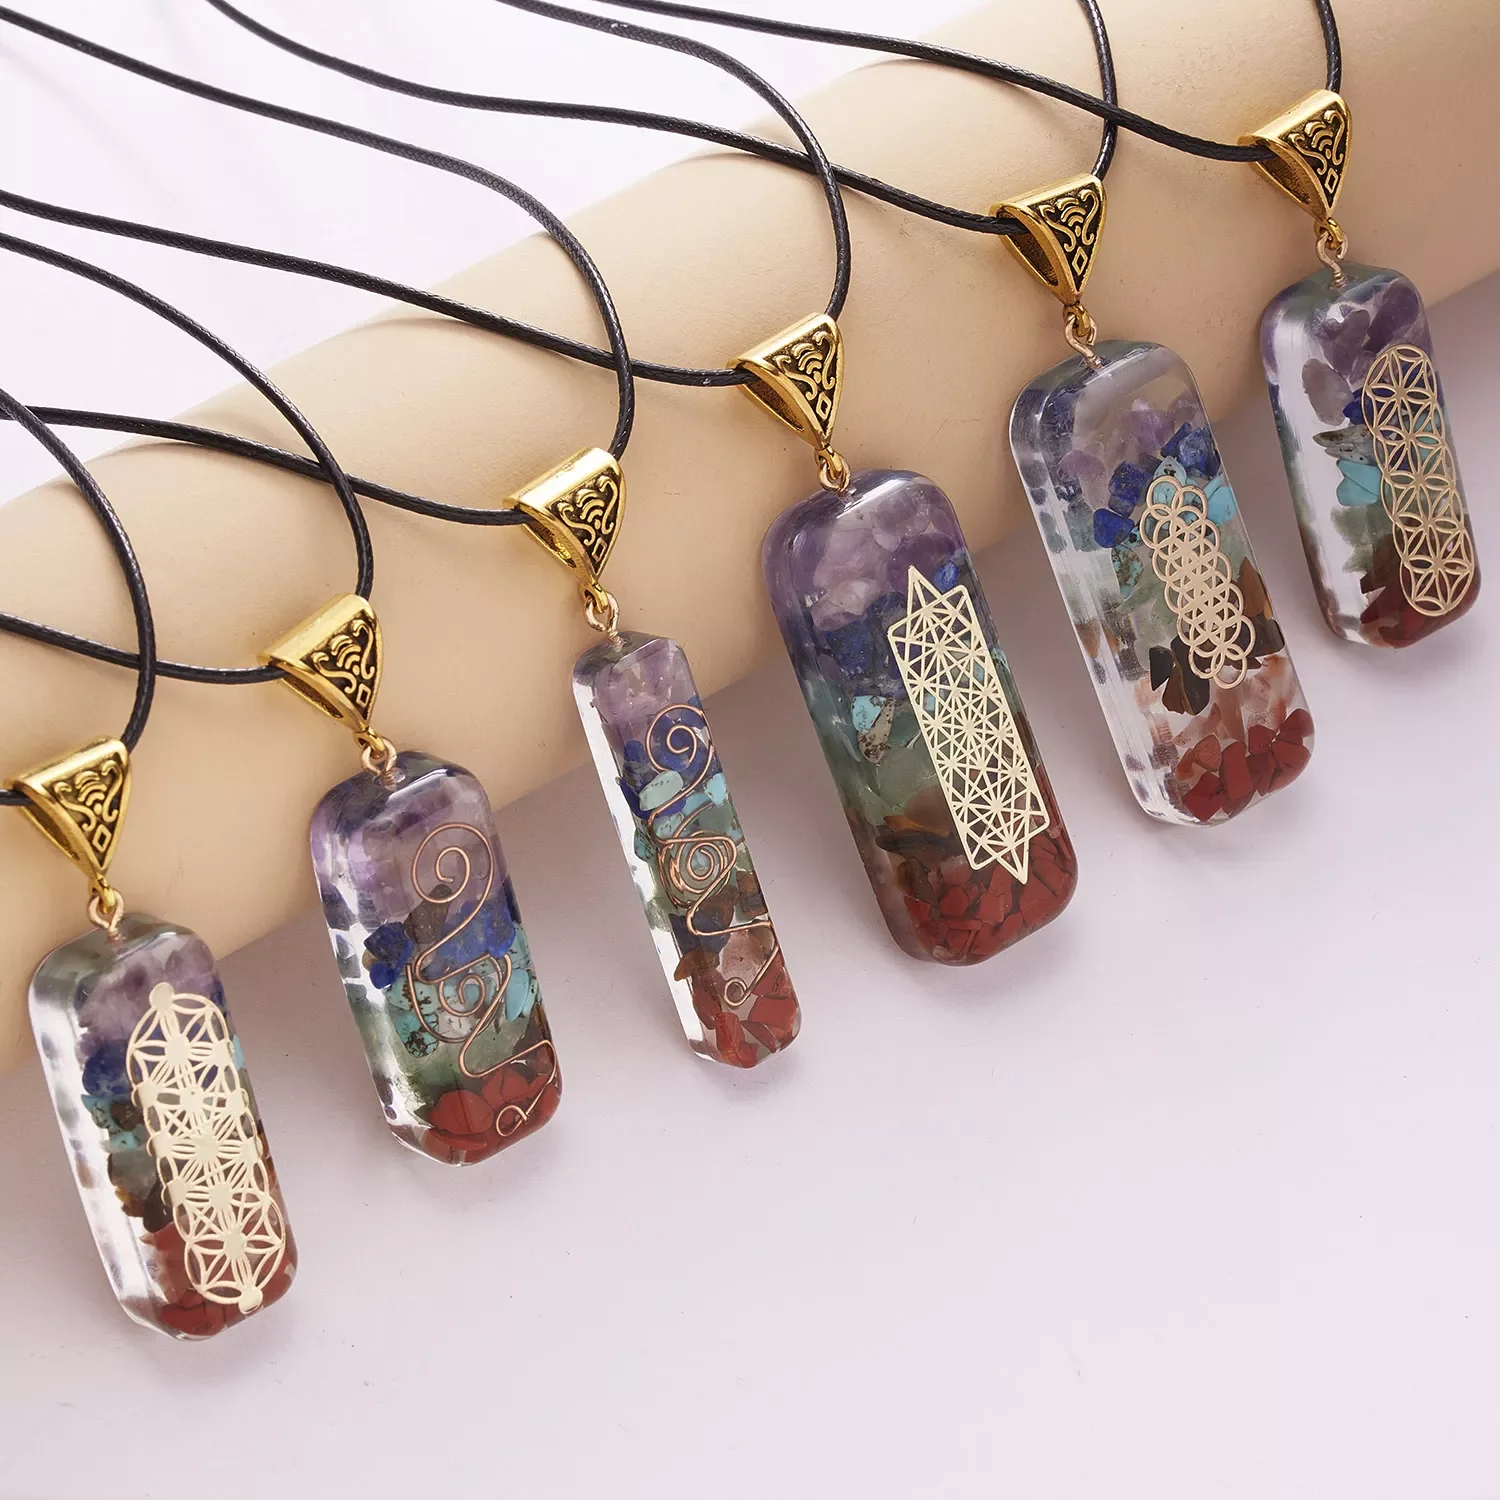 Seven Chakras Healing Necklace For Women Men Colorful Natural Stone Geometric Pendant Rope Chain Necklace Fashion Jewelry